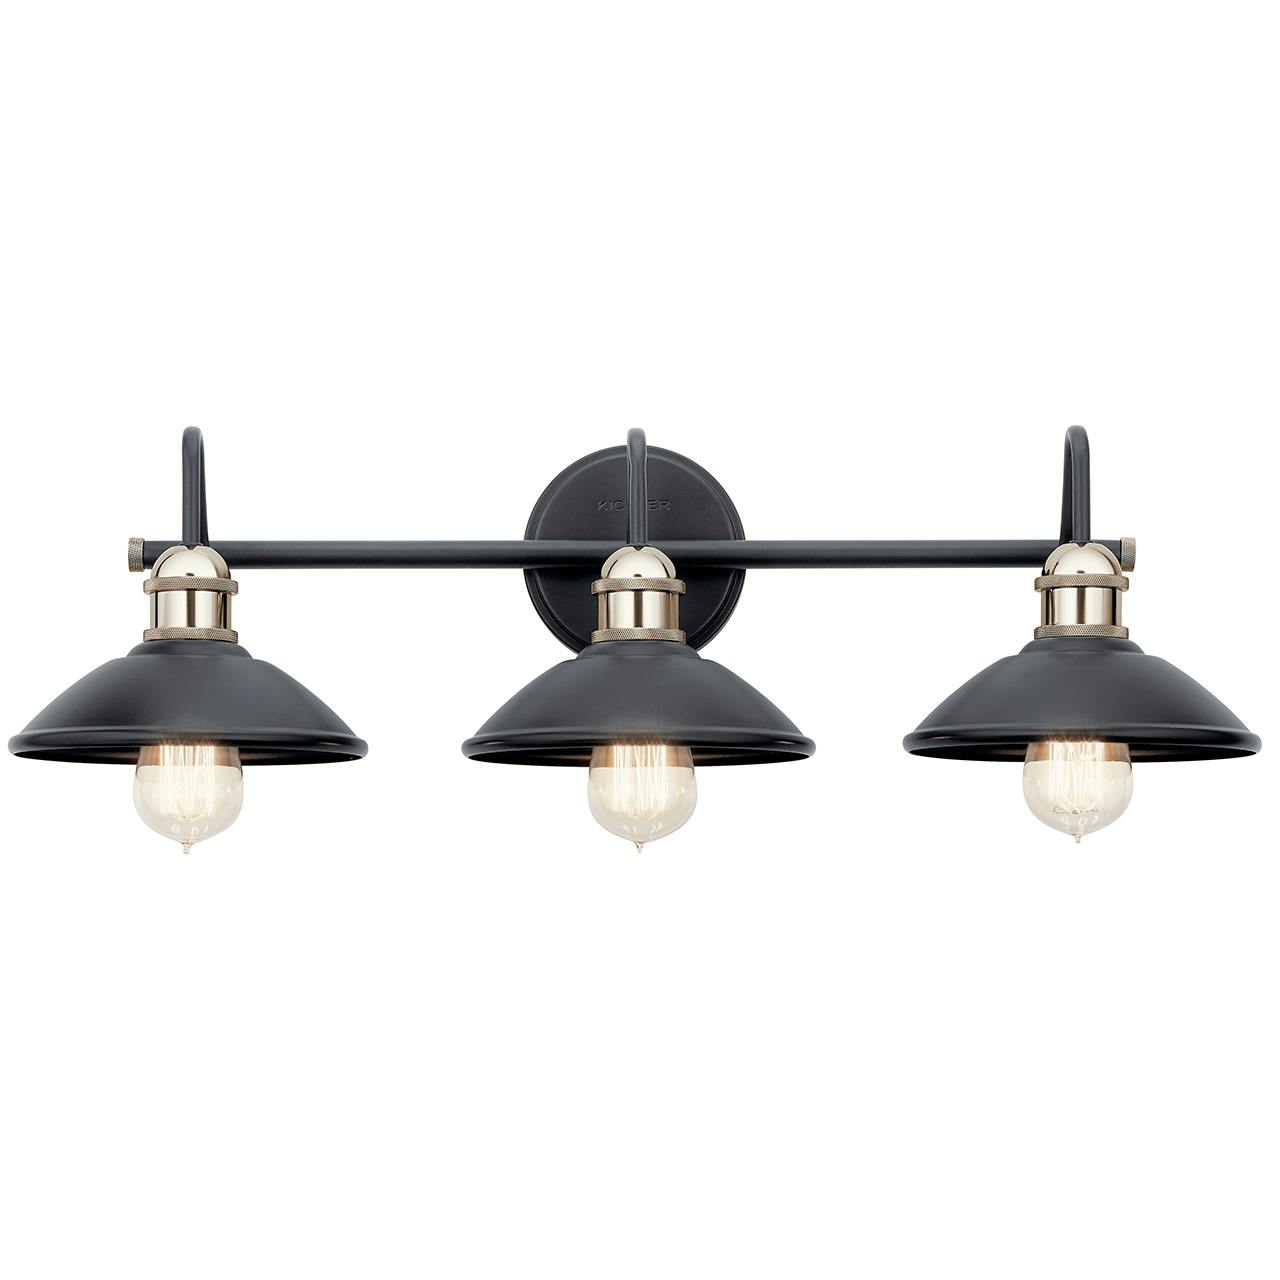 Front view of the Clyde 3 Light Vanity Light Black on a white background